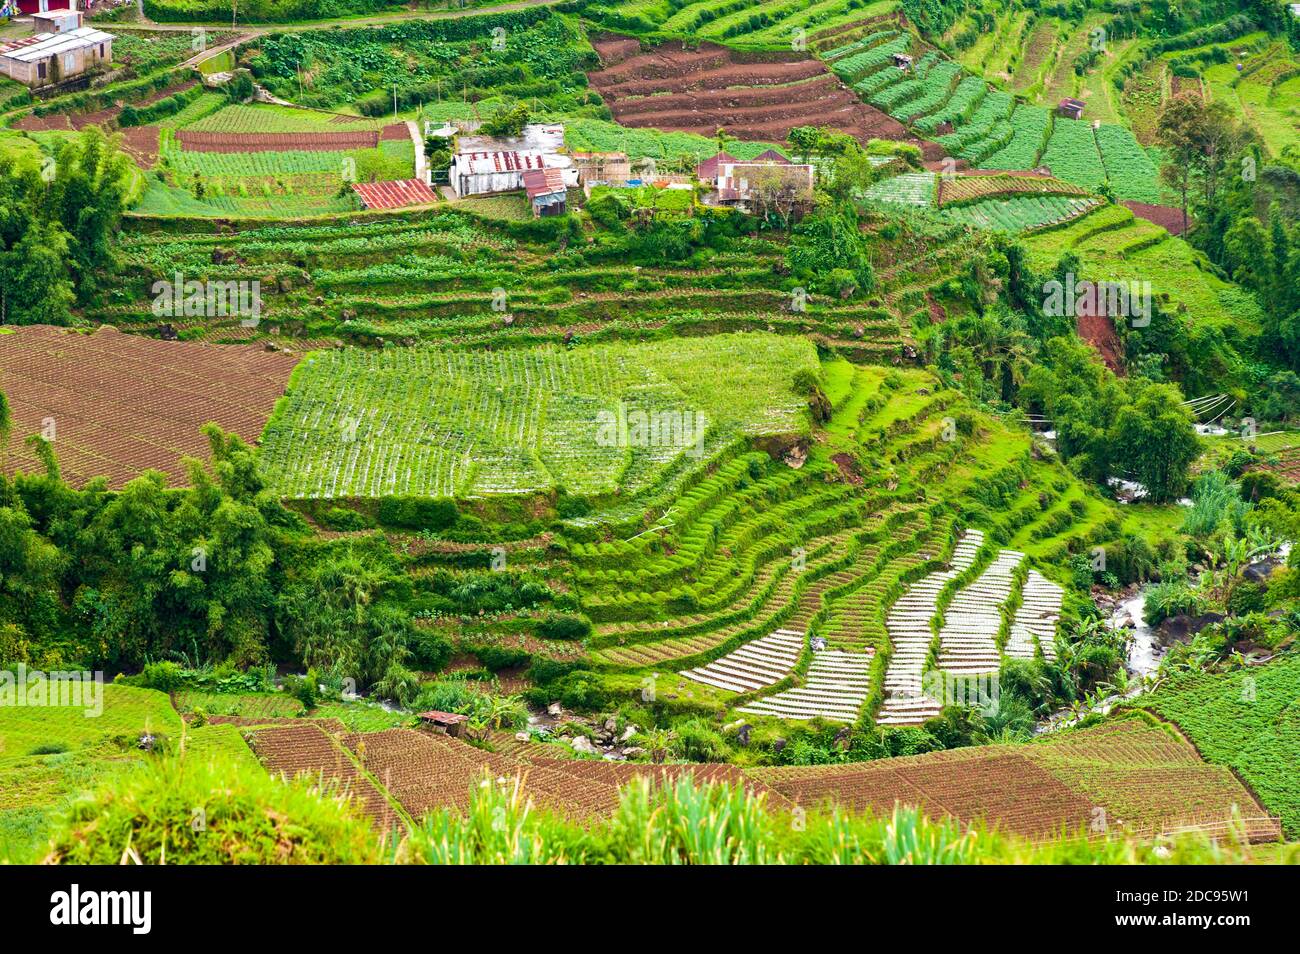 Aerial Photo of Terraced Vegetable Fields, Wonosobo Town, Dieng Plateau, Central Java, Indonesia, Asia Stock Photo